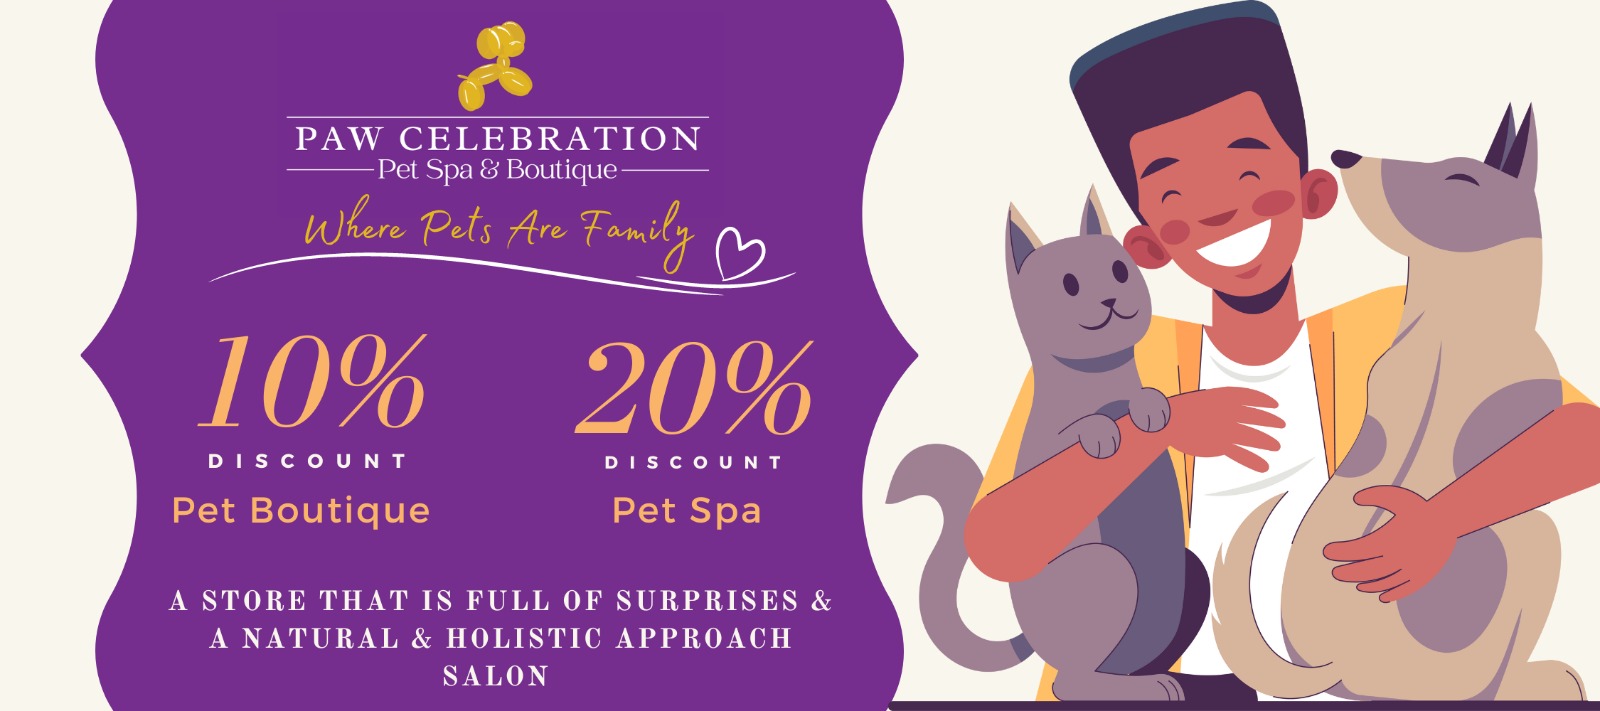 Paw Celebration Pet Grooming & Boutique